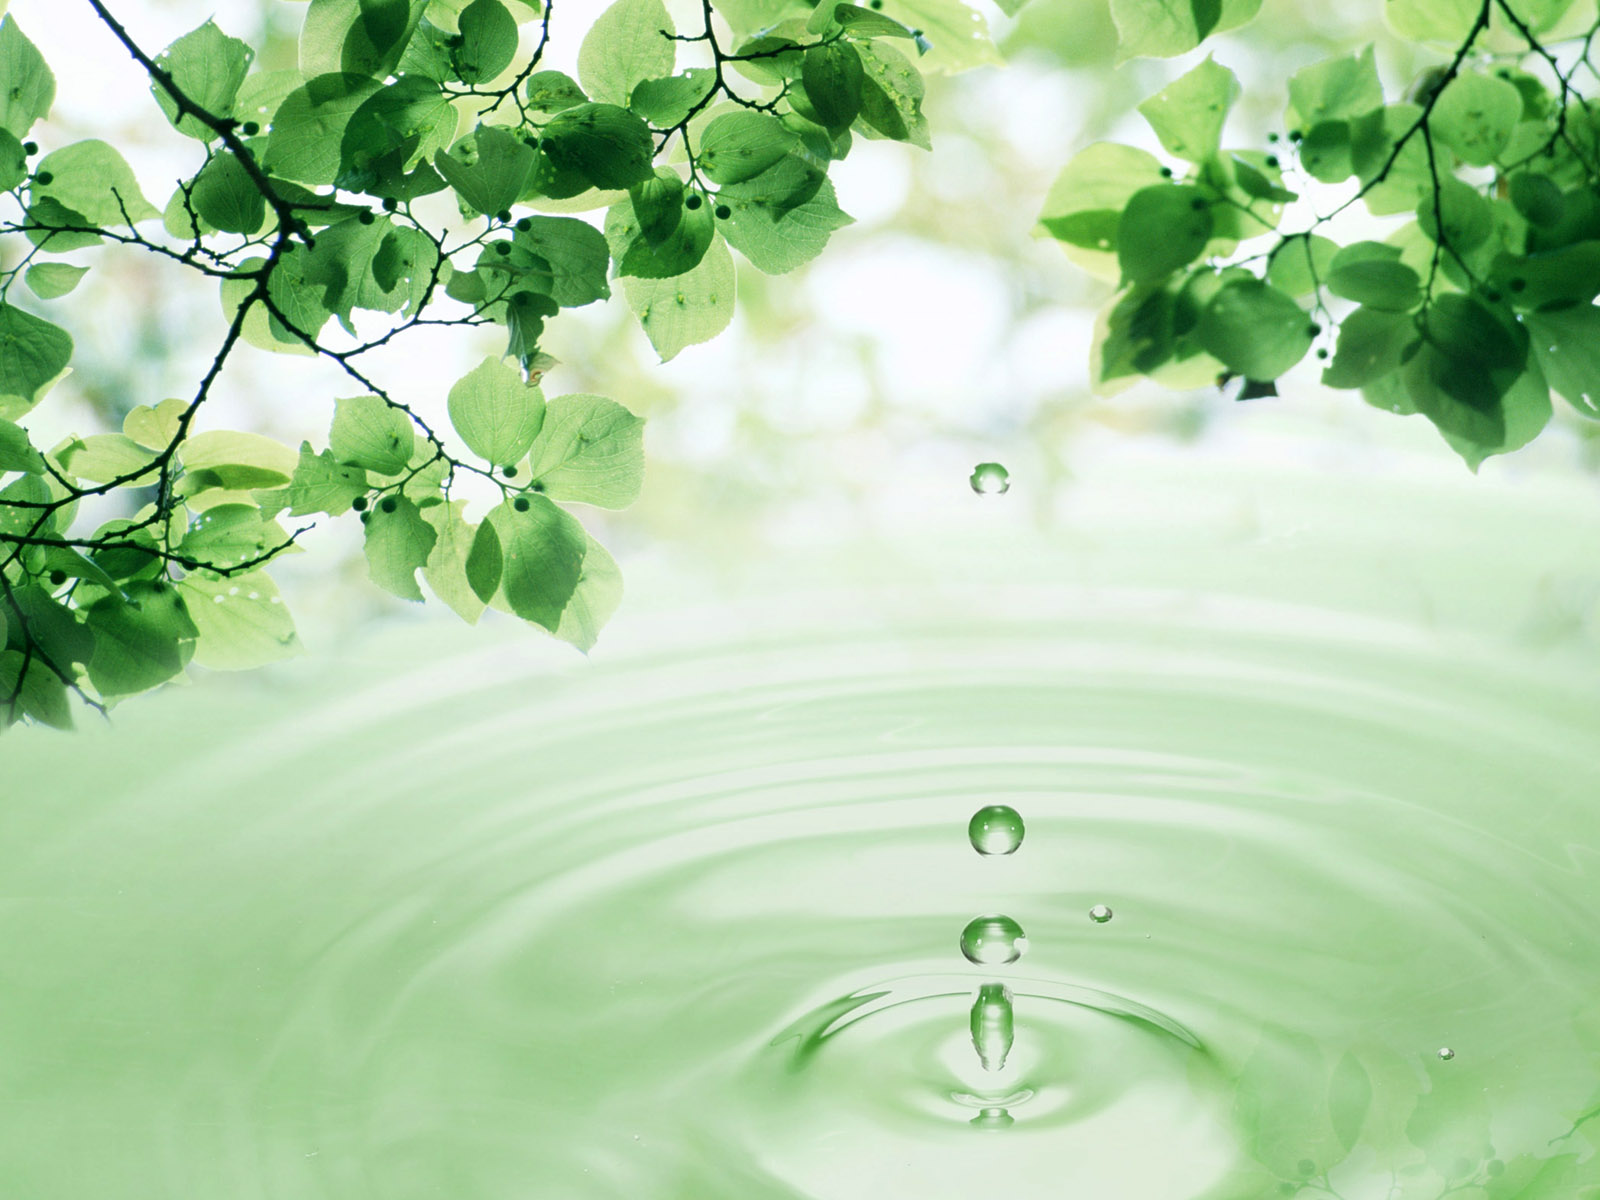 Water Droping From The Leave With Drop Wallpaper Jpg